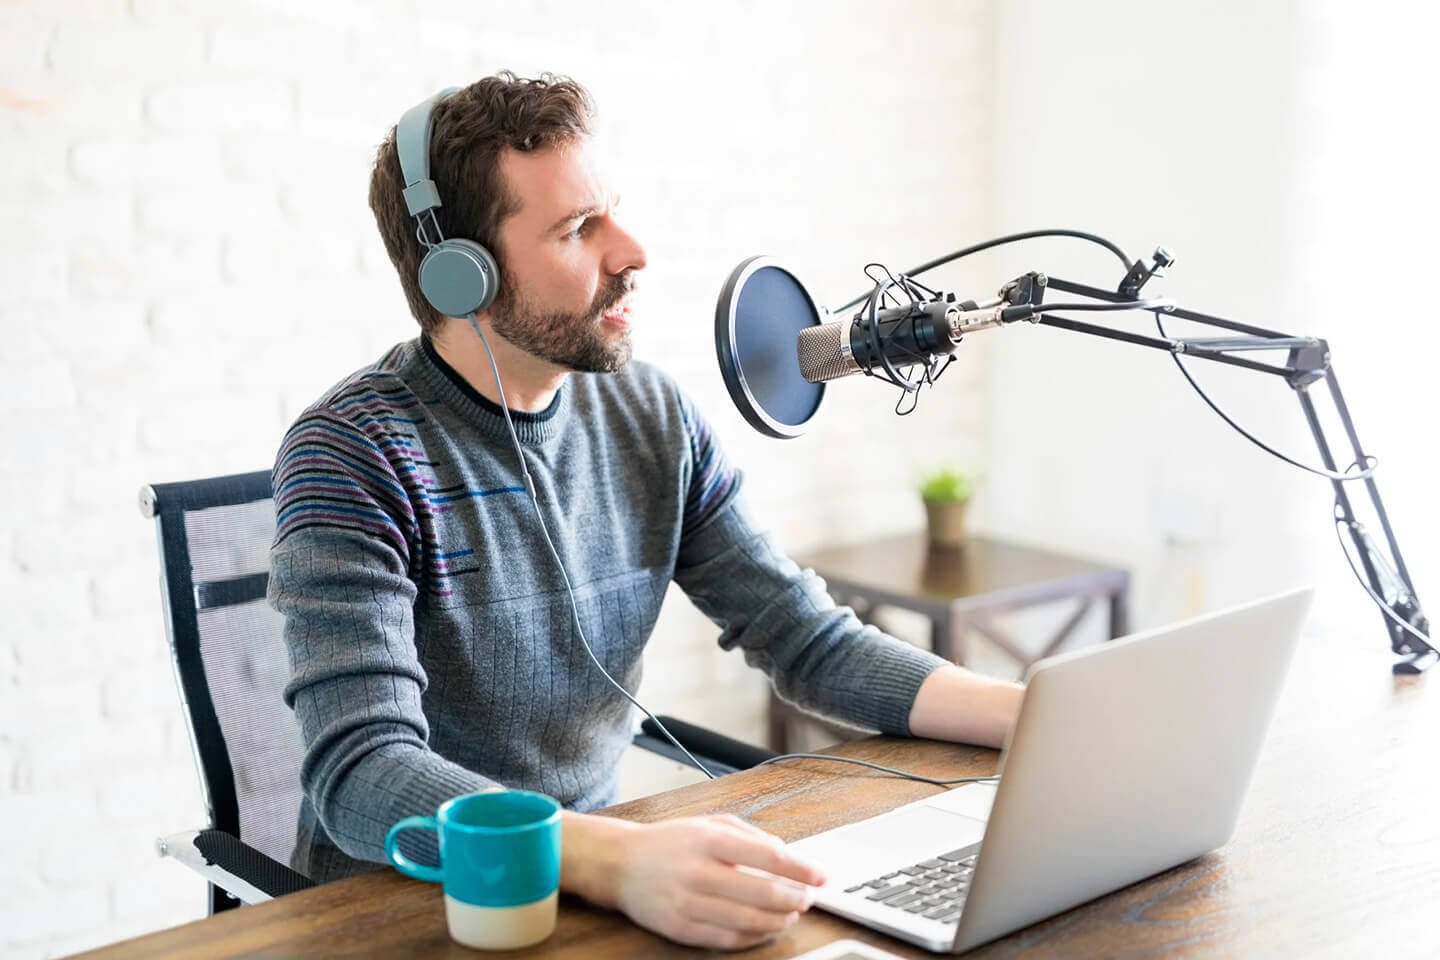 Starting a Podcast? Here's How to Prepare